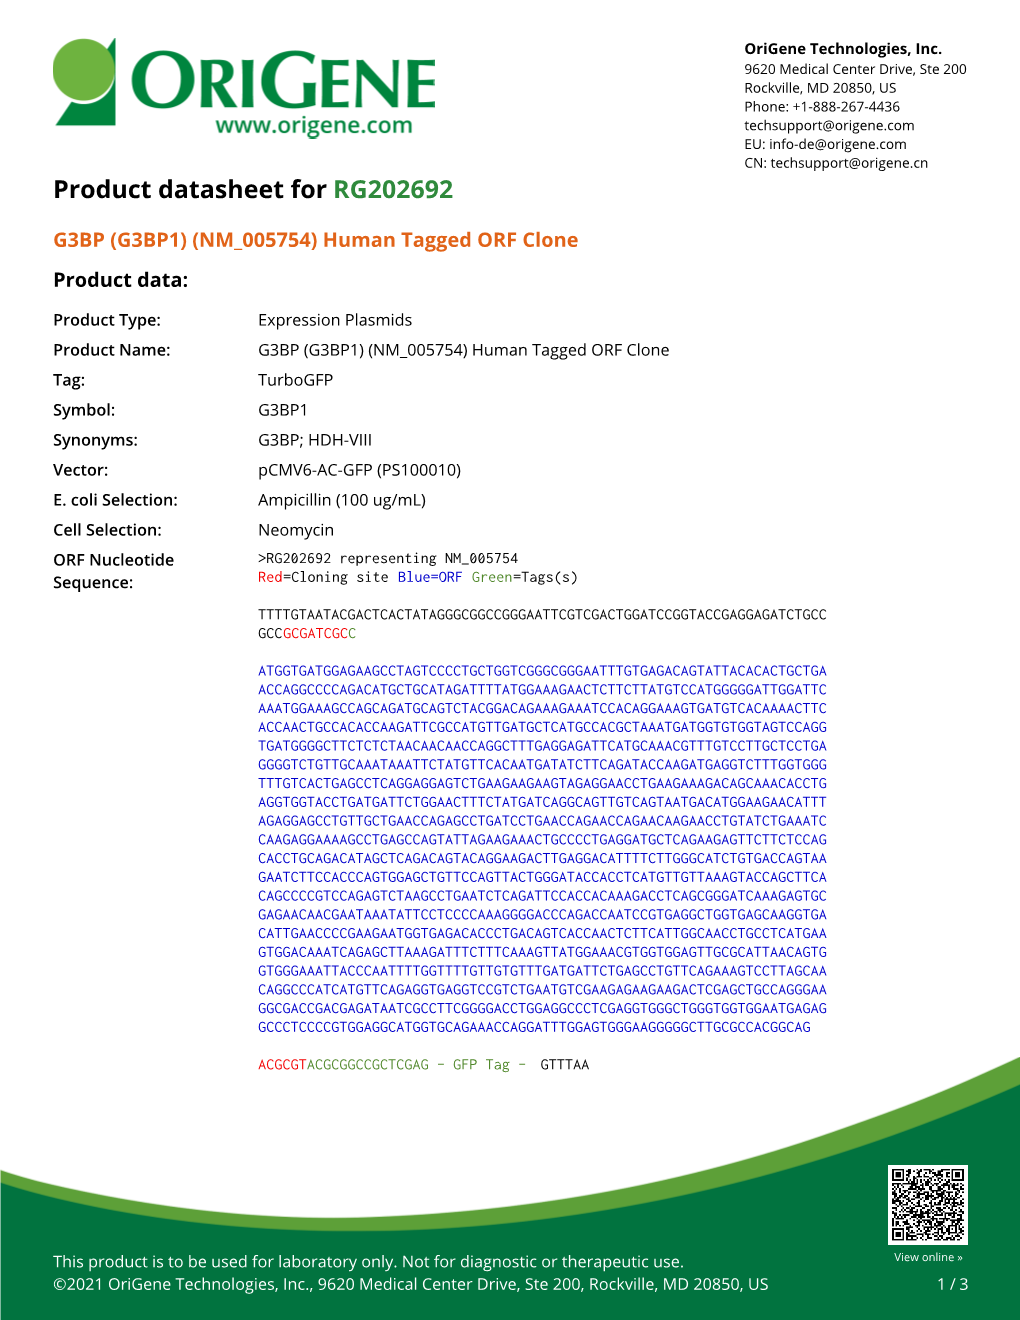 G3BP (G3BP1) (NM 005754) Human Tagged ORF Clone Product Data